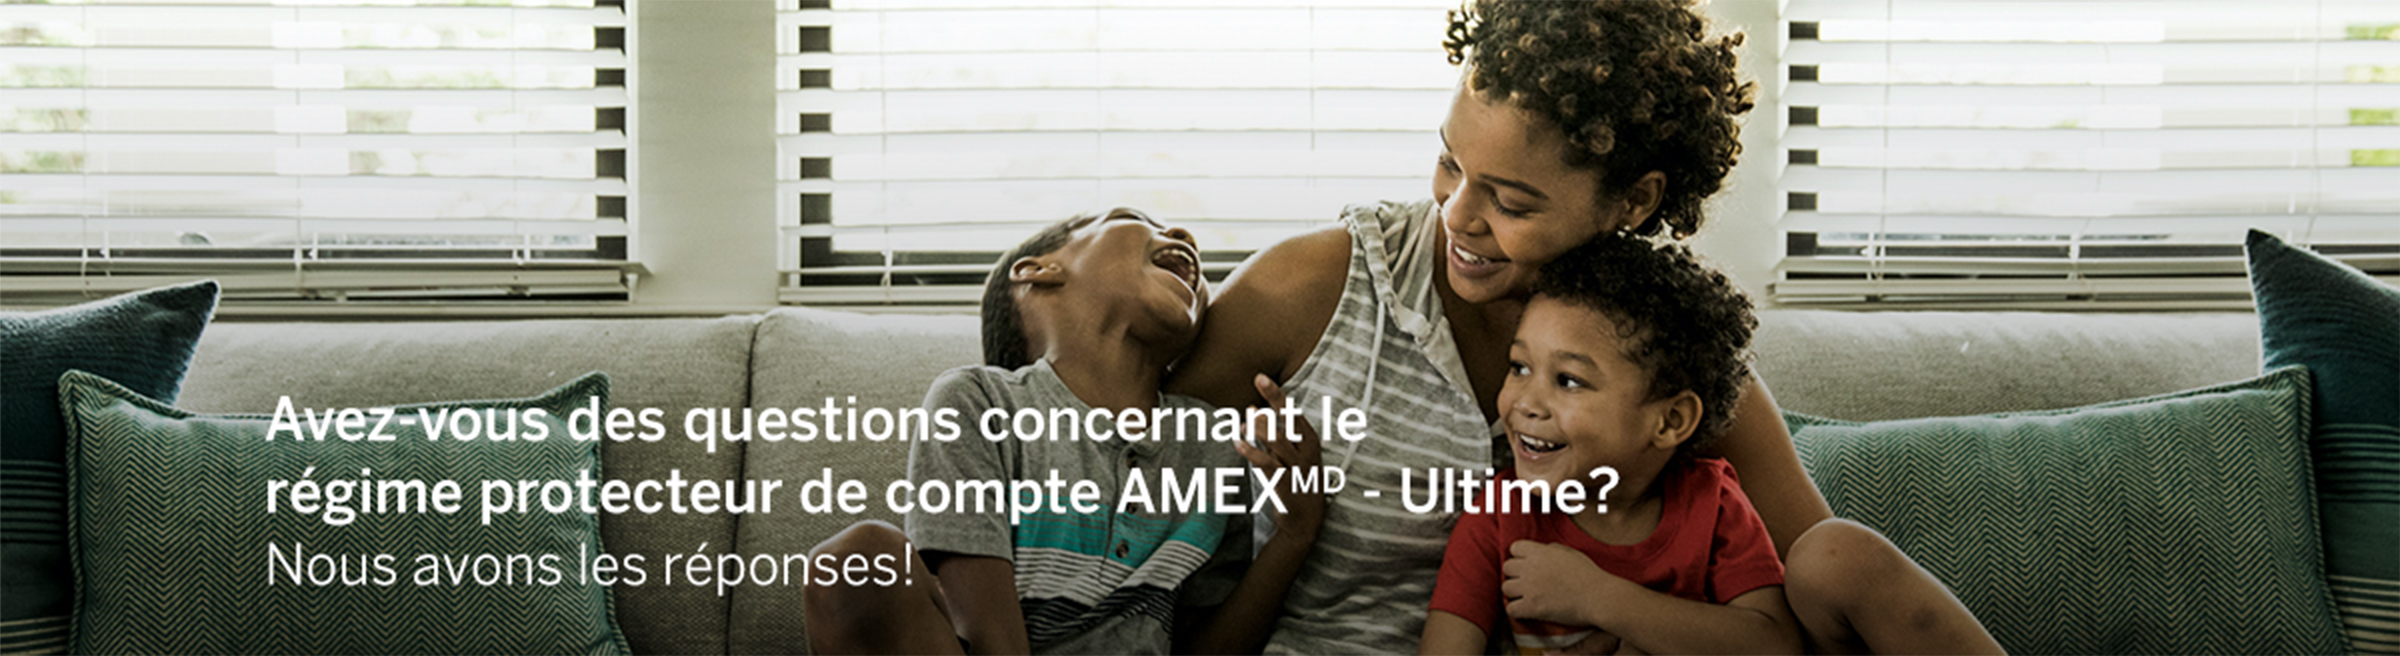 Have questions about AMEX Account Protector Ultimate? We have answers!